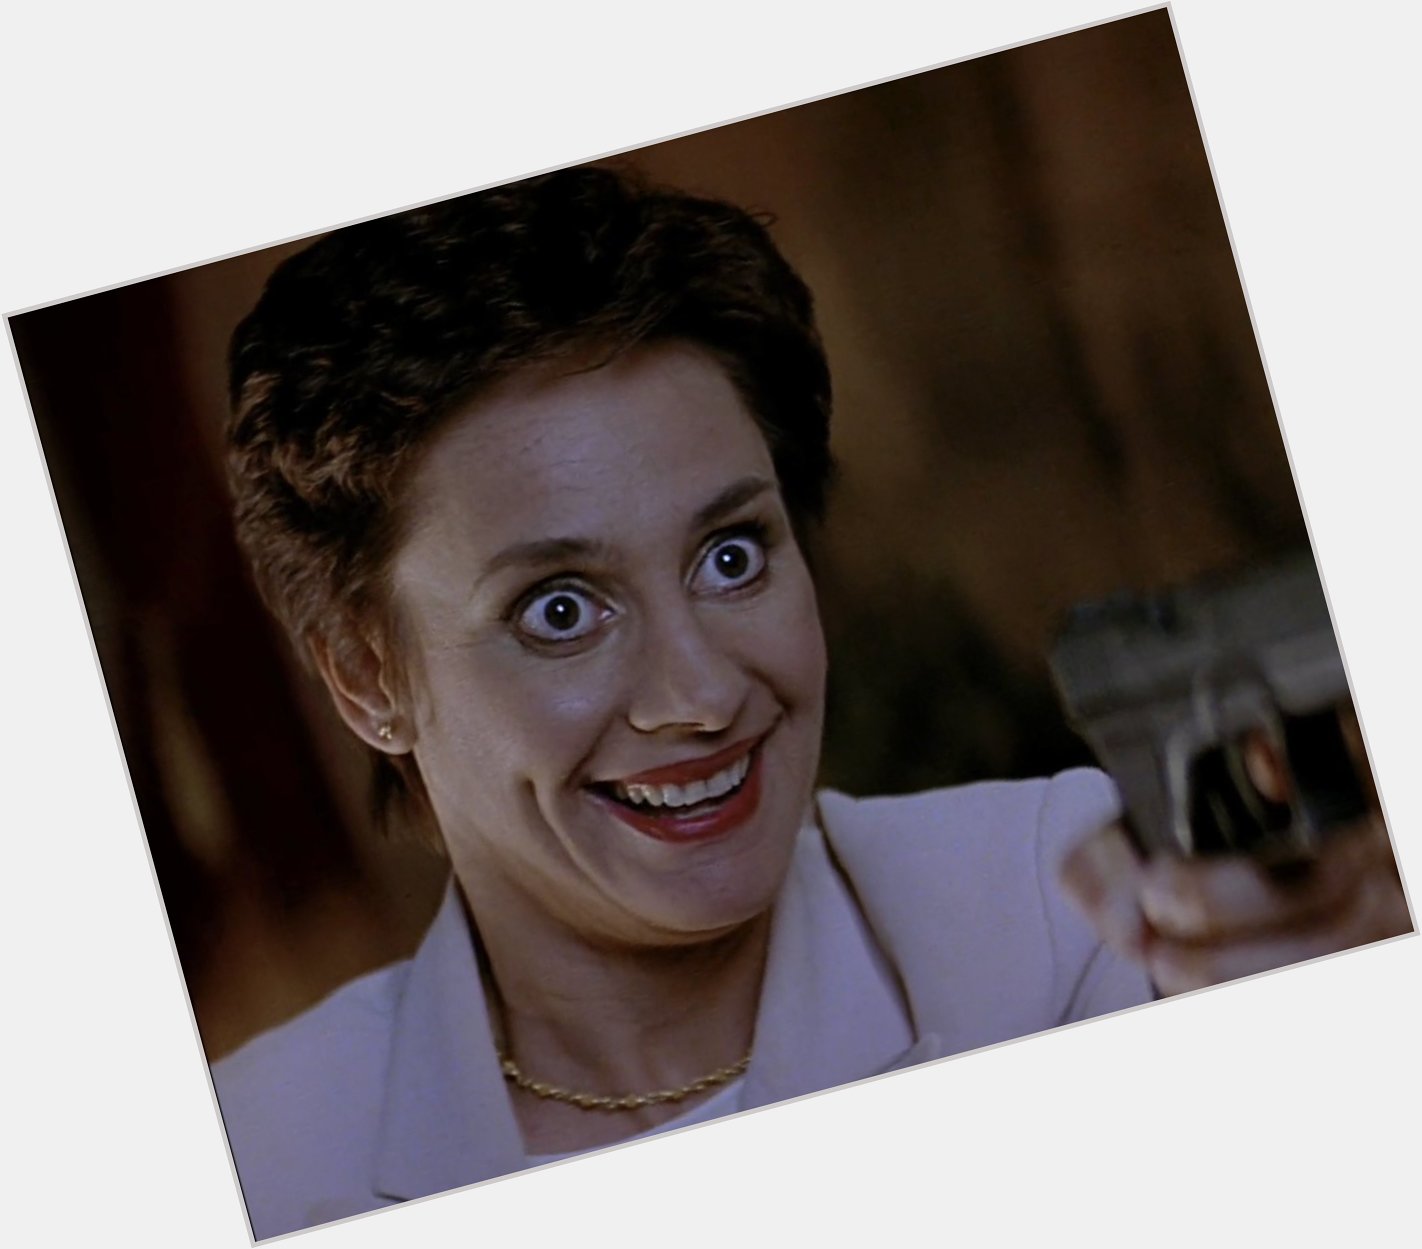  Happy birthday to Laurie Metcalf who was born on June 16, 1955 